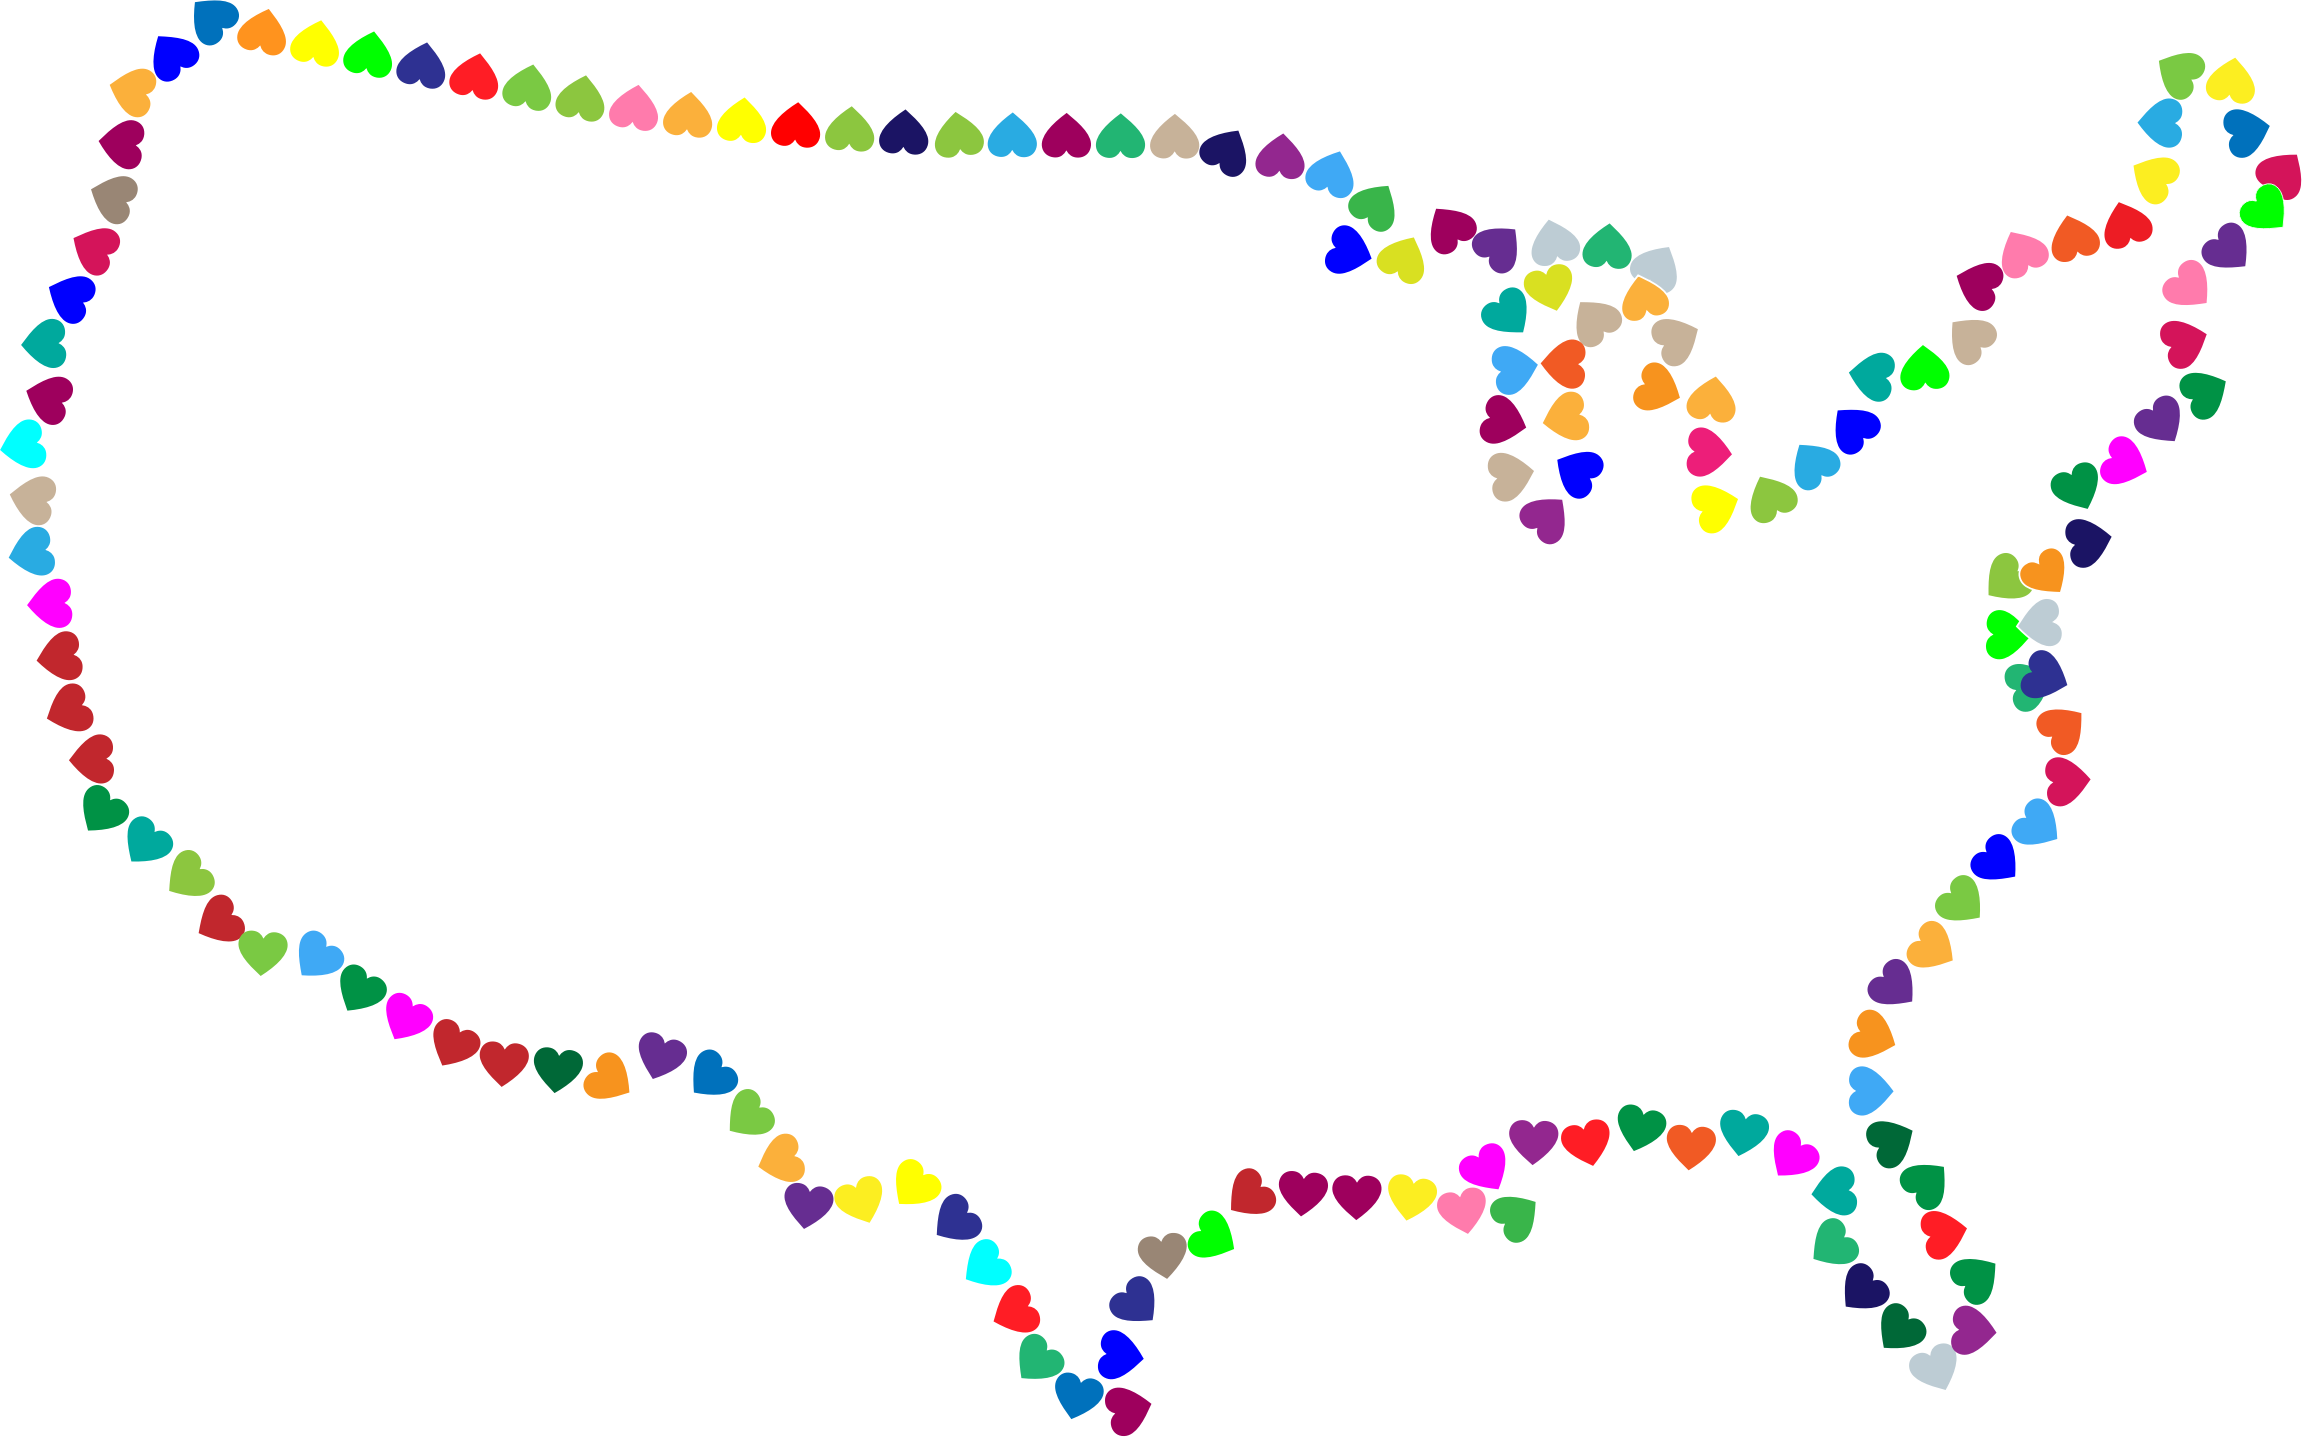 Clipart united states map